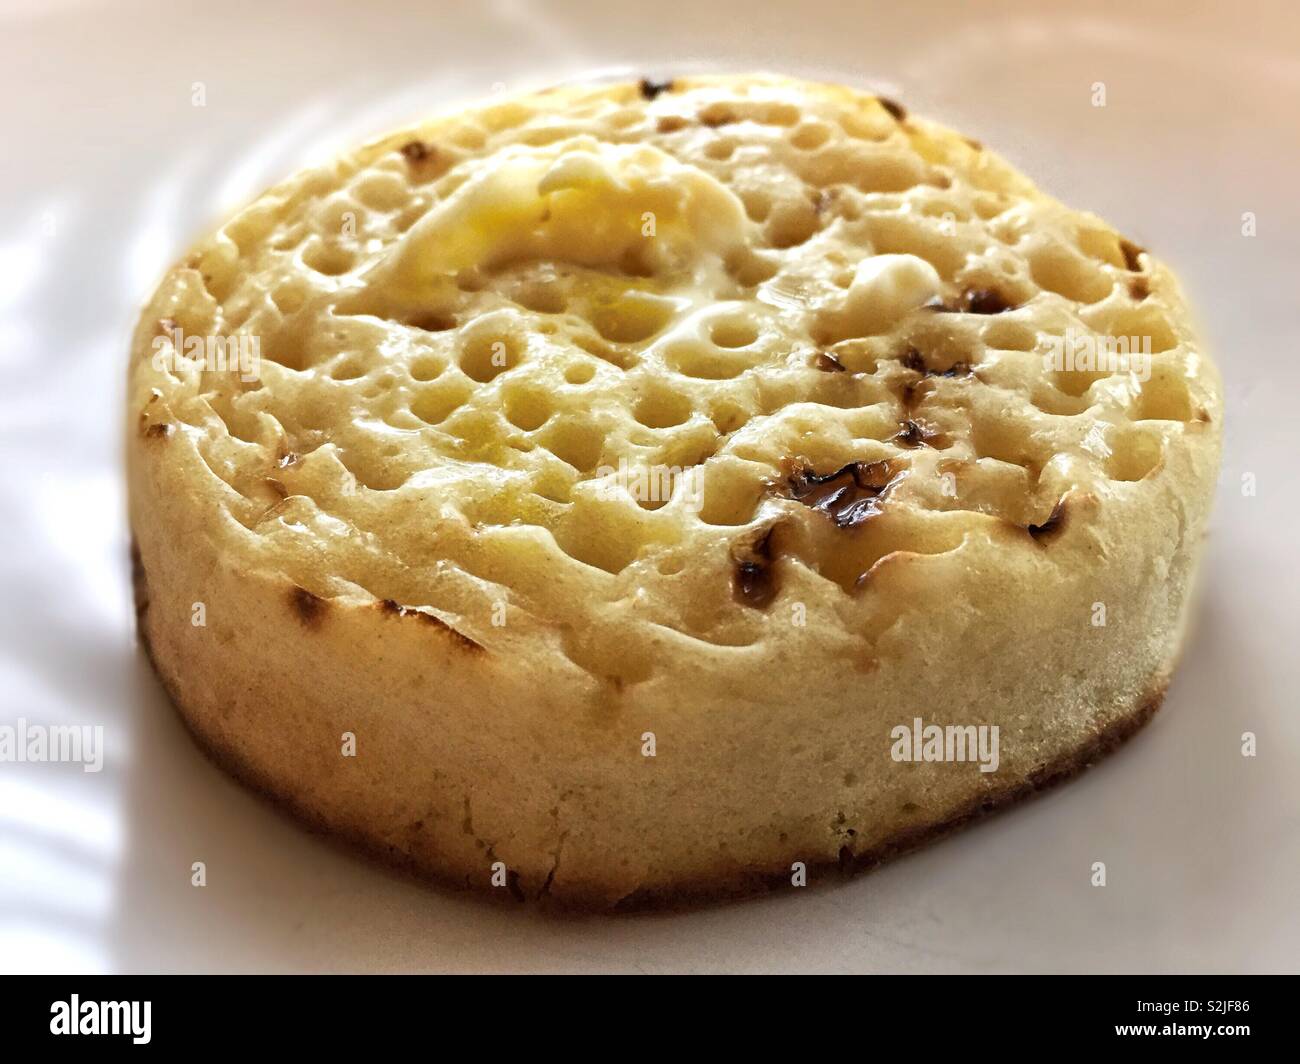 Hot toasted and buttered crumpet.  Food for the morning and great for breakfast.  Served with coffee or tea.  Cooked and eat with jam or marmalade Stock Photo